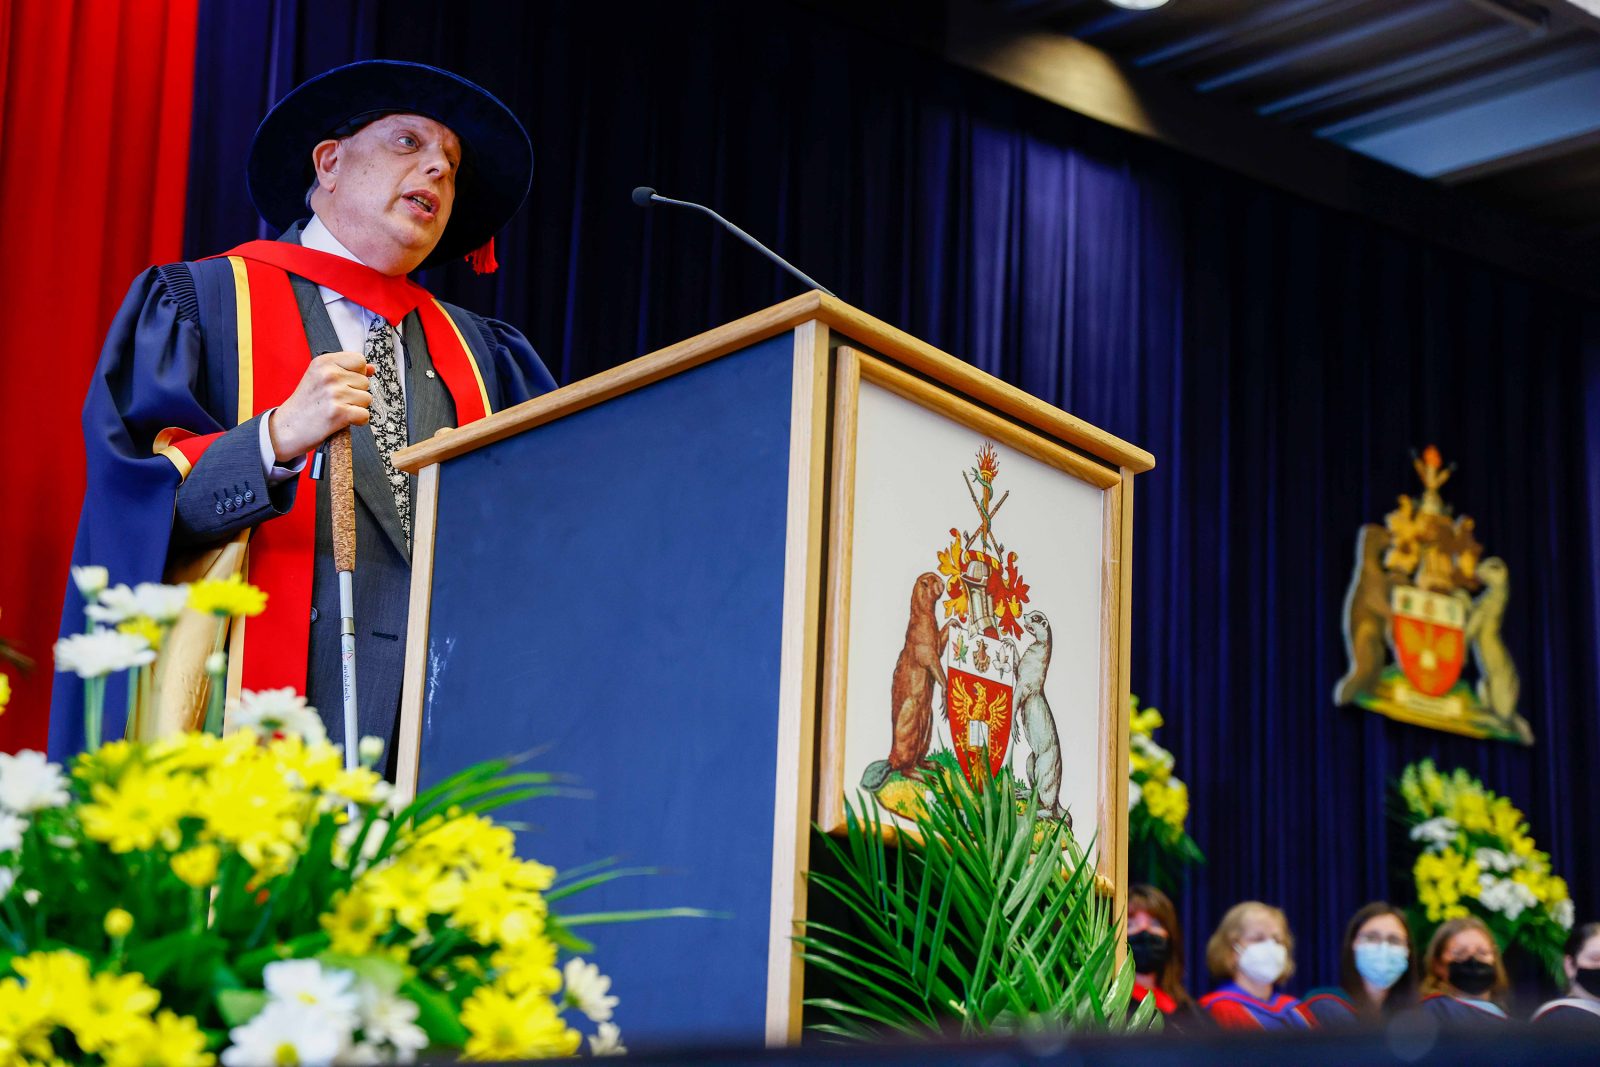 A man in a graduation gown stands at a podium.